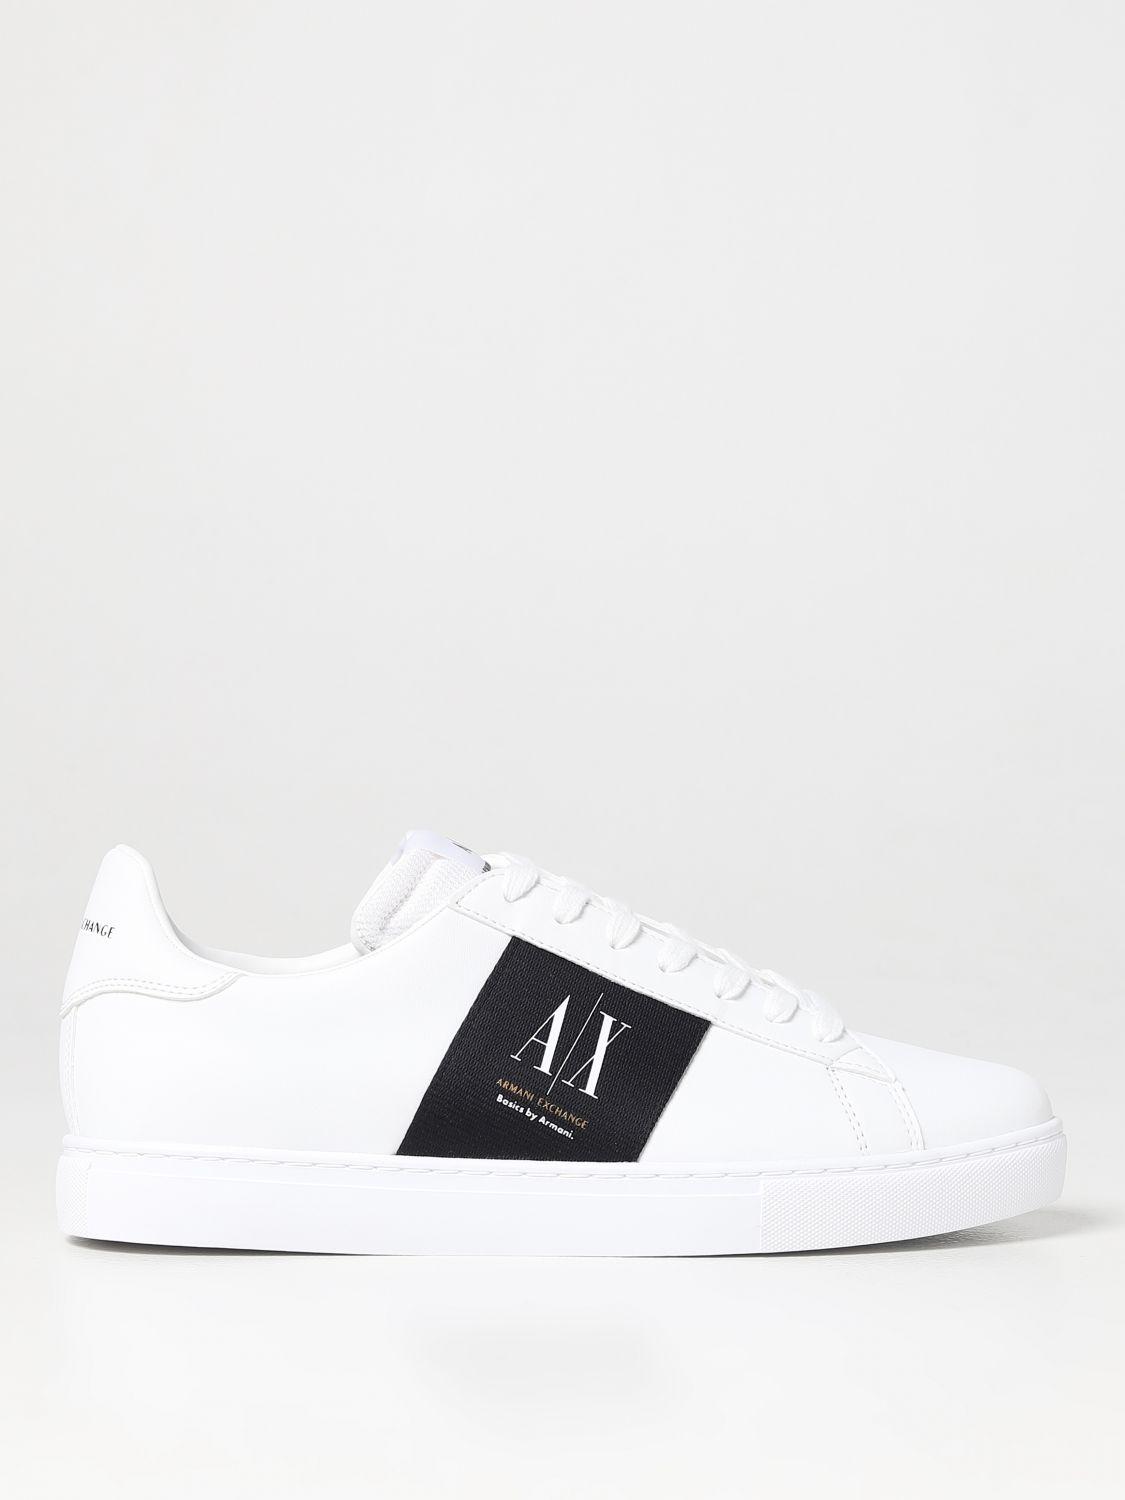 Armani Exchange Suede Stitched Logo Sneakers In Milky White | ModeSens